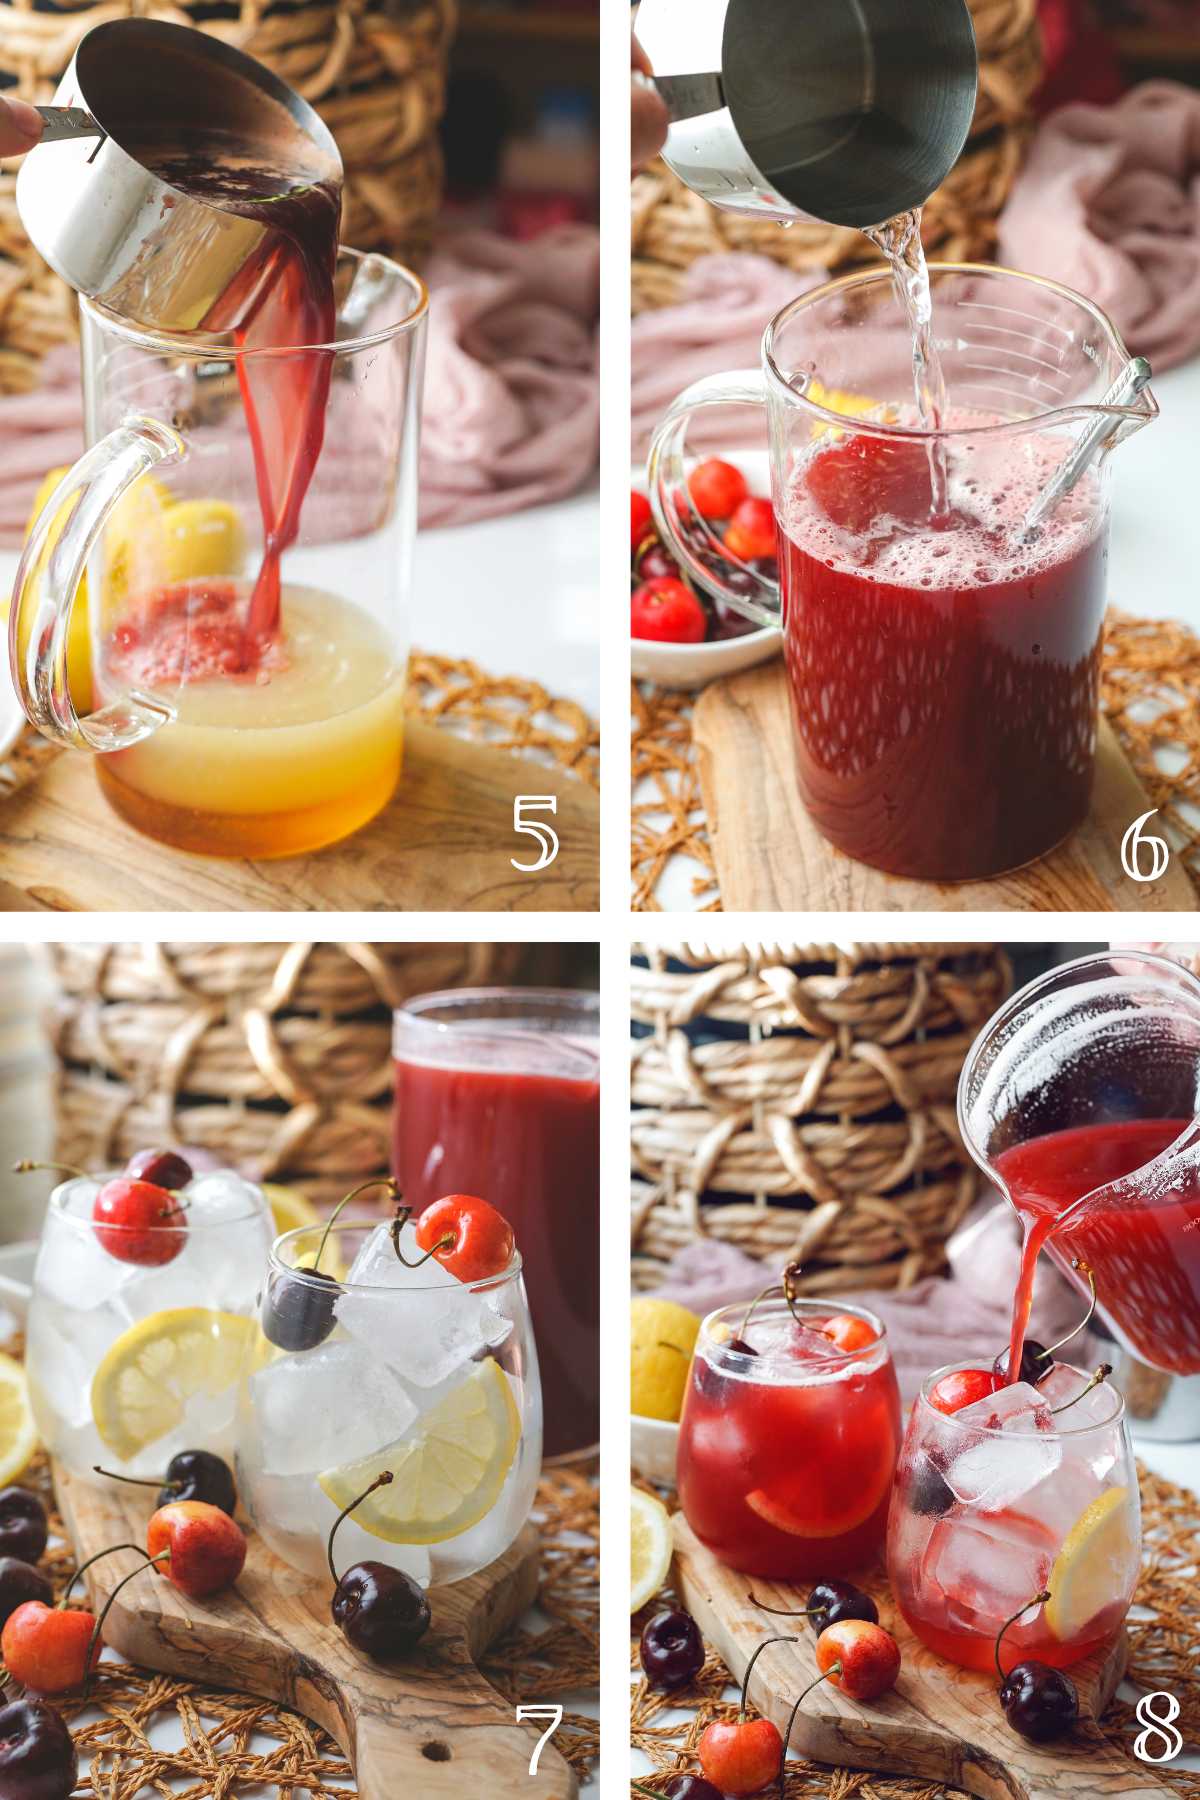 Process pictures showing how to assemble the cherry lemonade and serve!